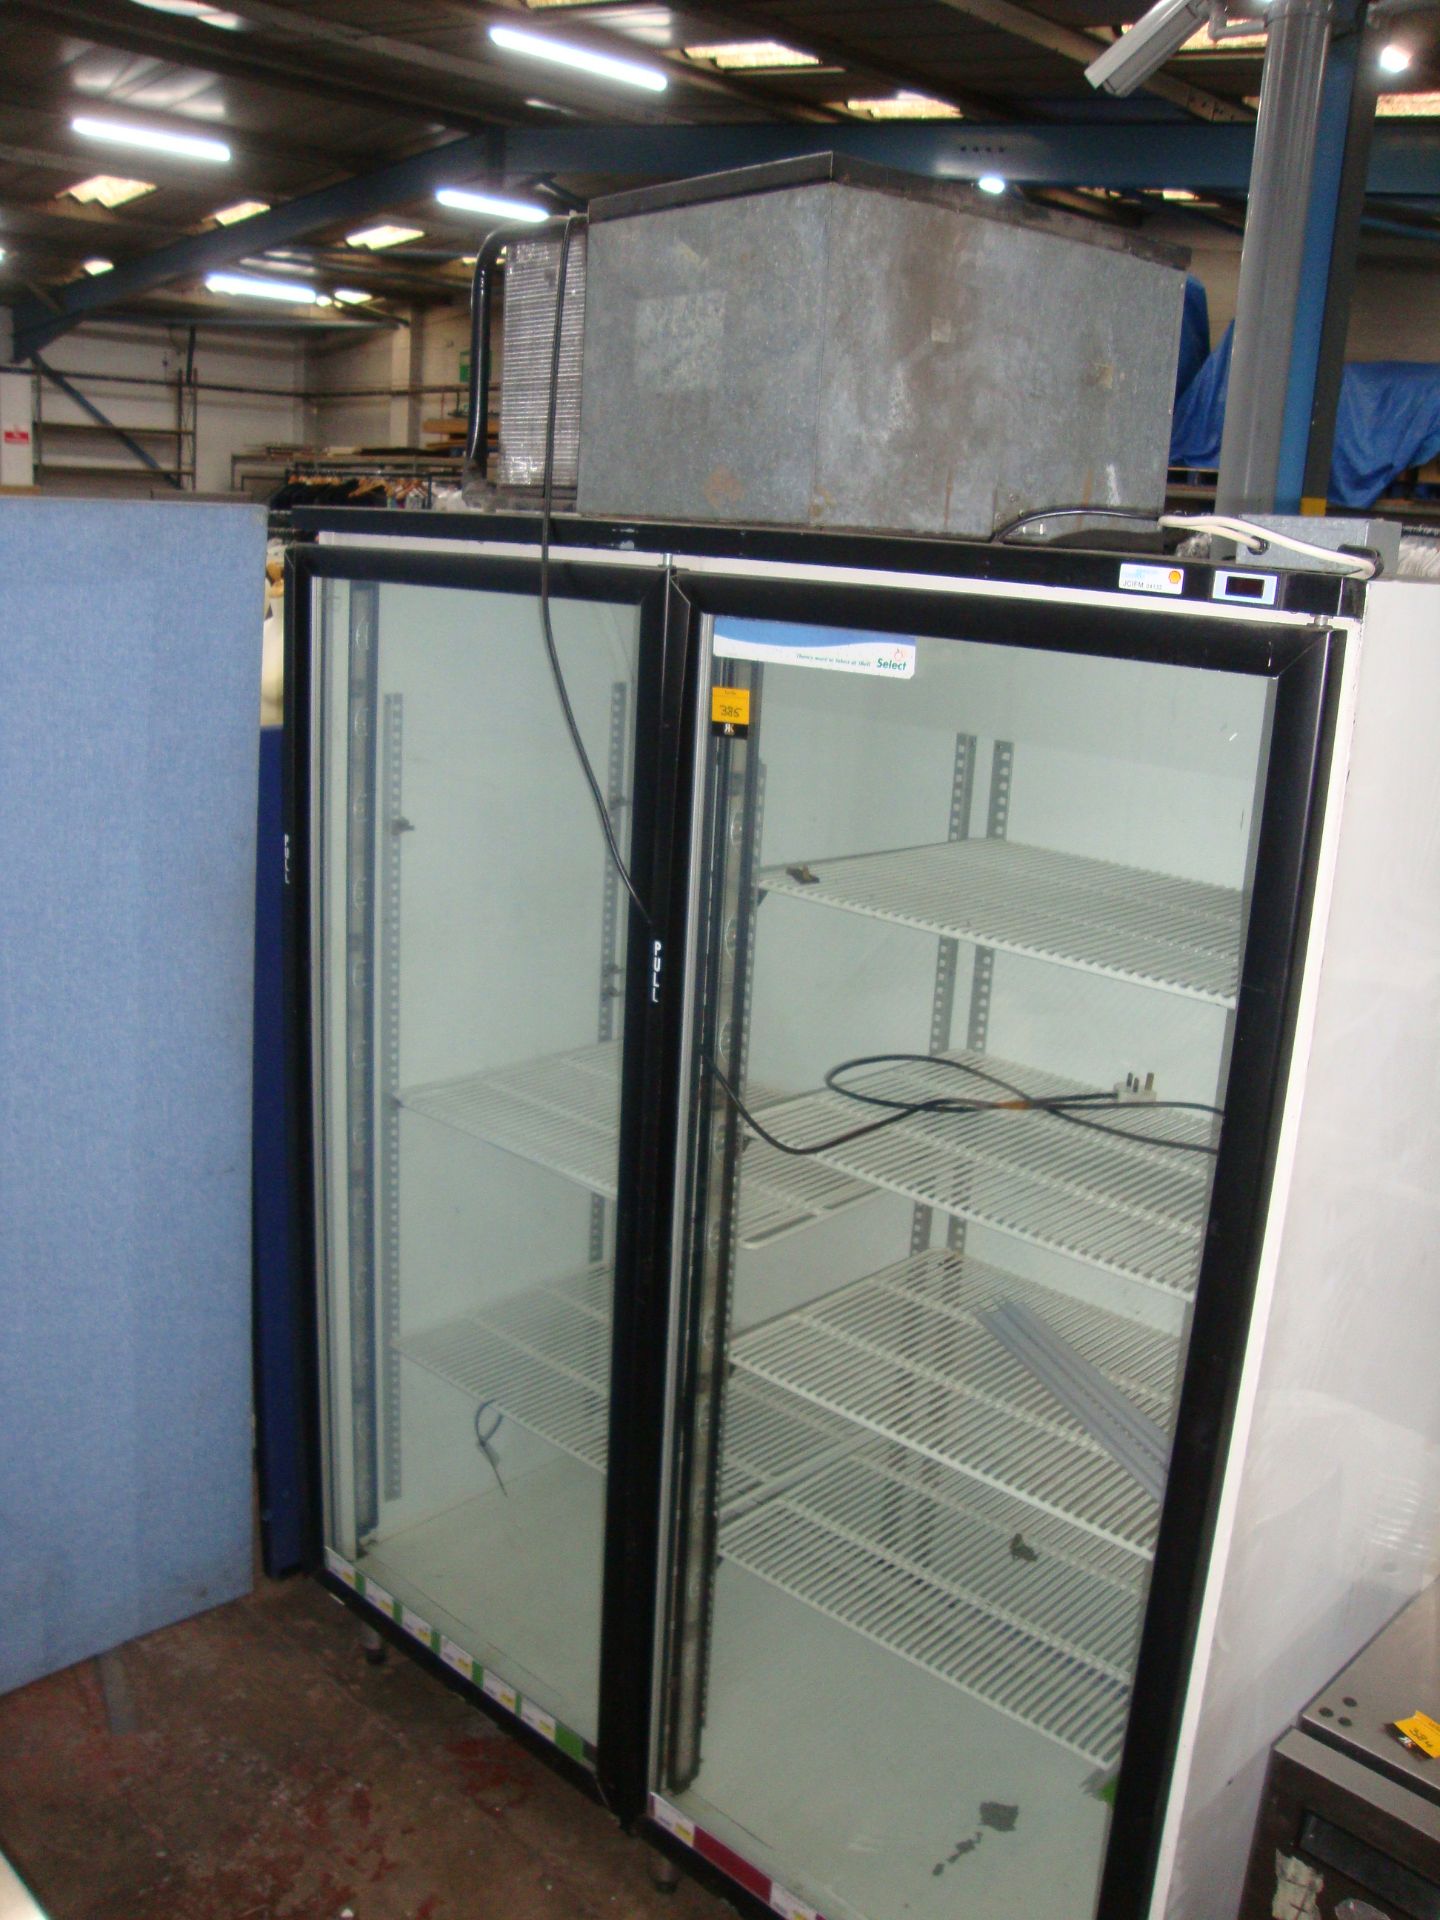 Large twin clear door display fridgeIMPORTANT: Please remember goods successfully bid upon must be